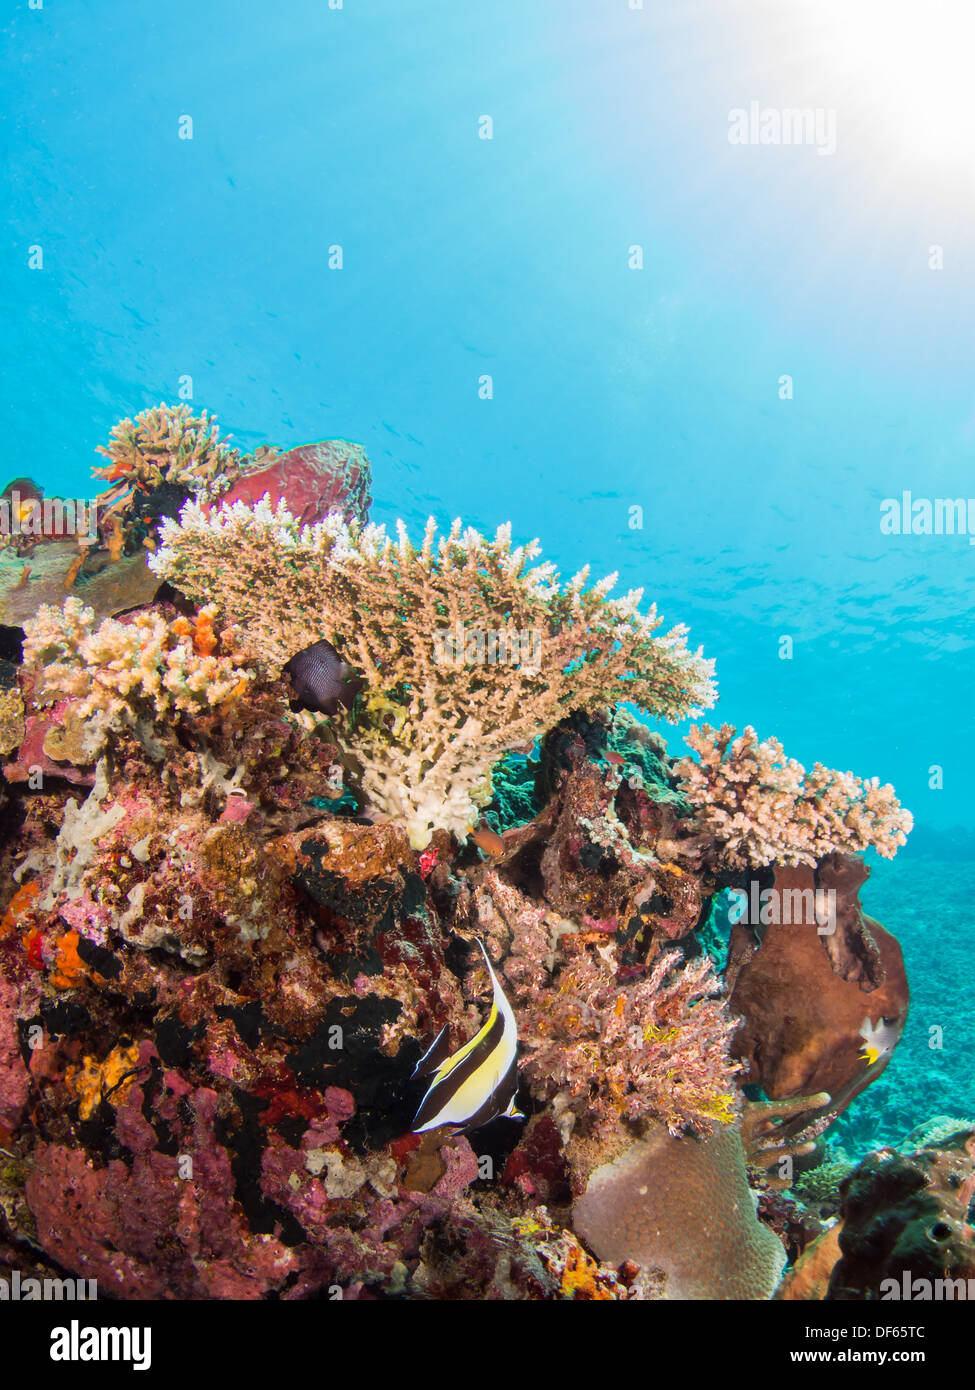 Colorful coral reef and fish at Bunaken, Indonesia Stock Photo